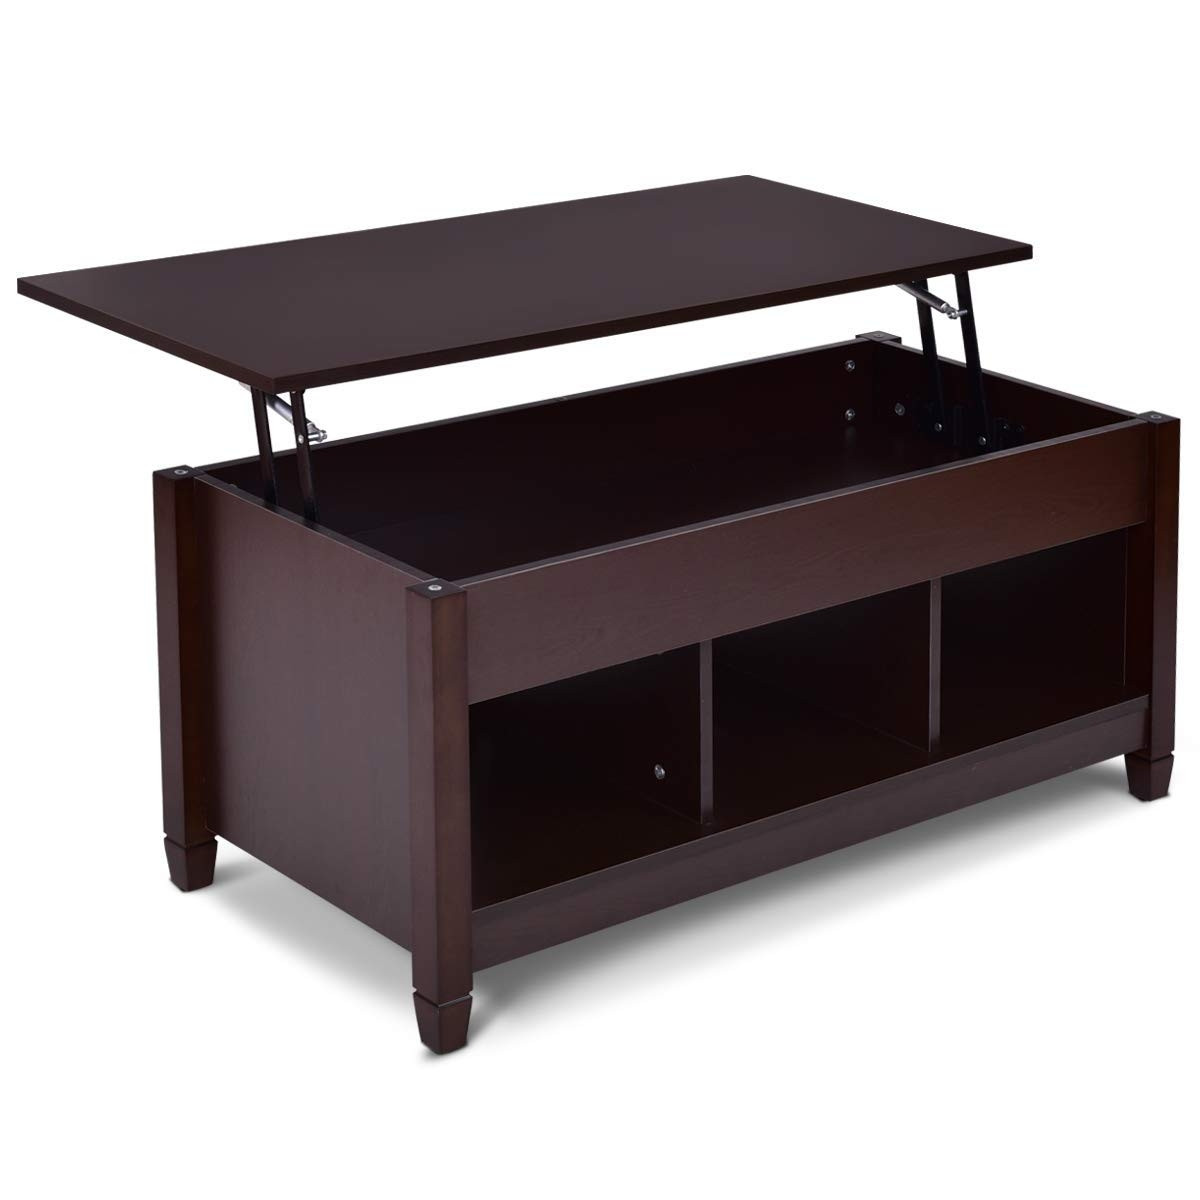 Lift Top Coffee Table With Hidden Storage Compartment